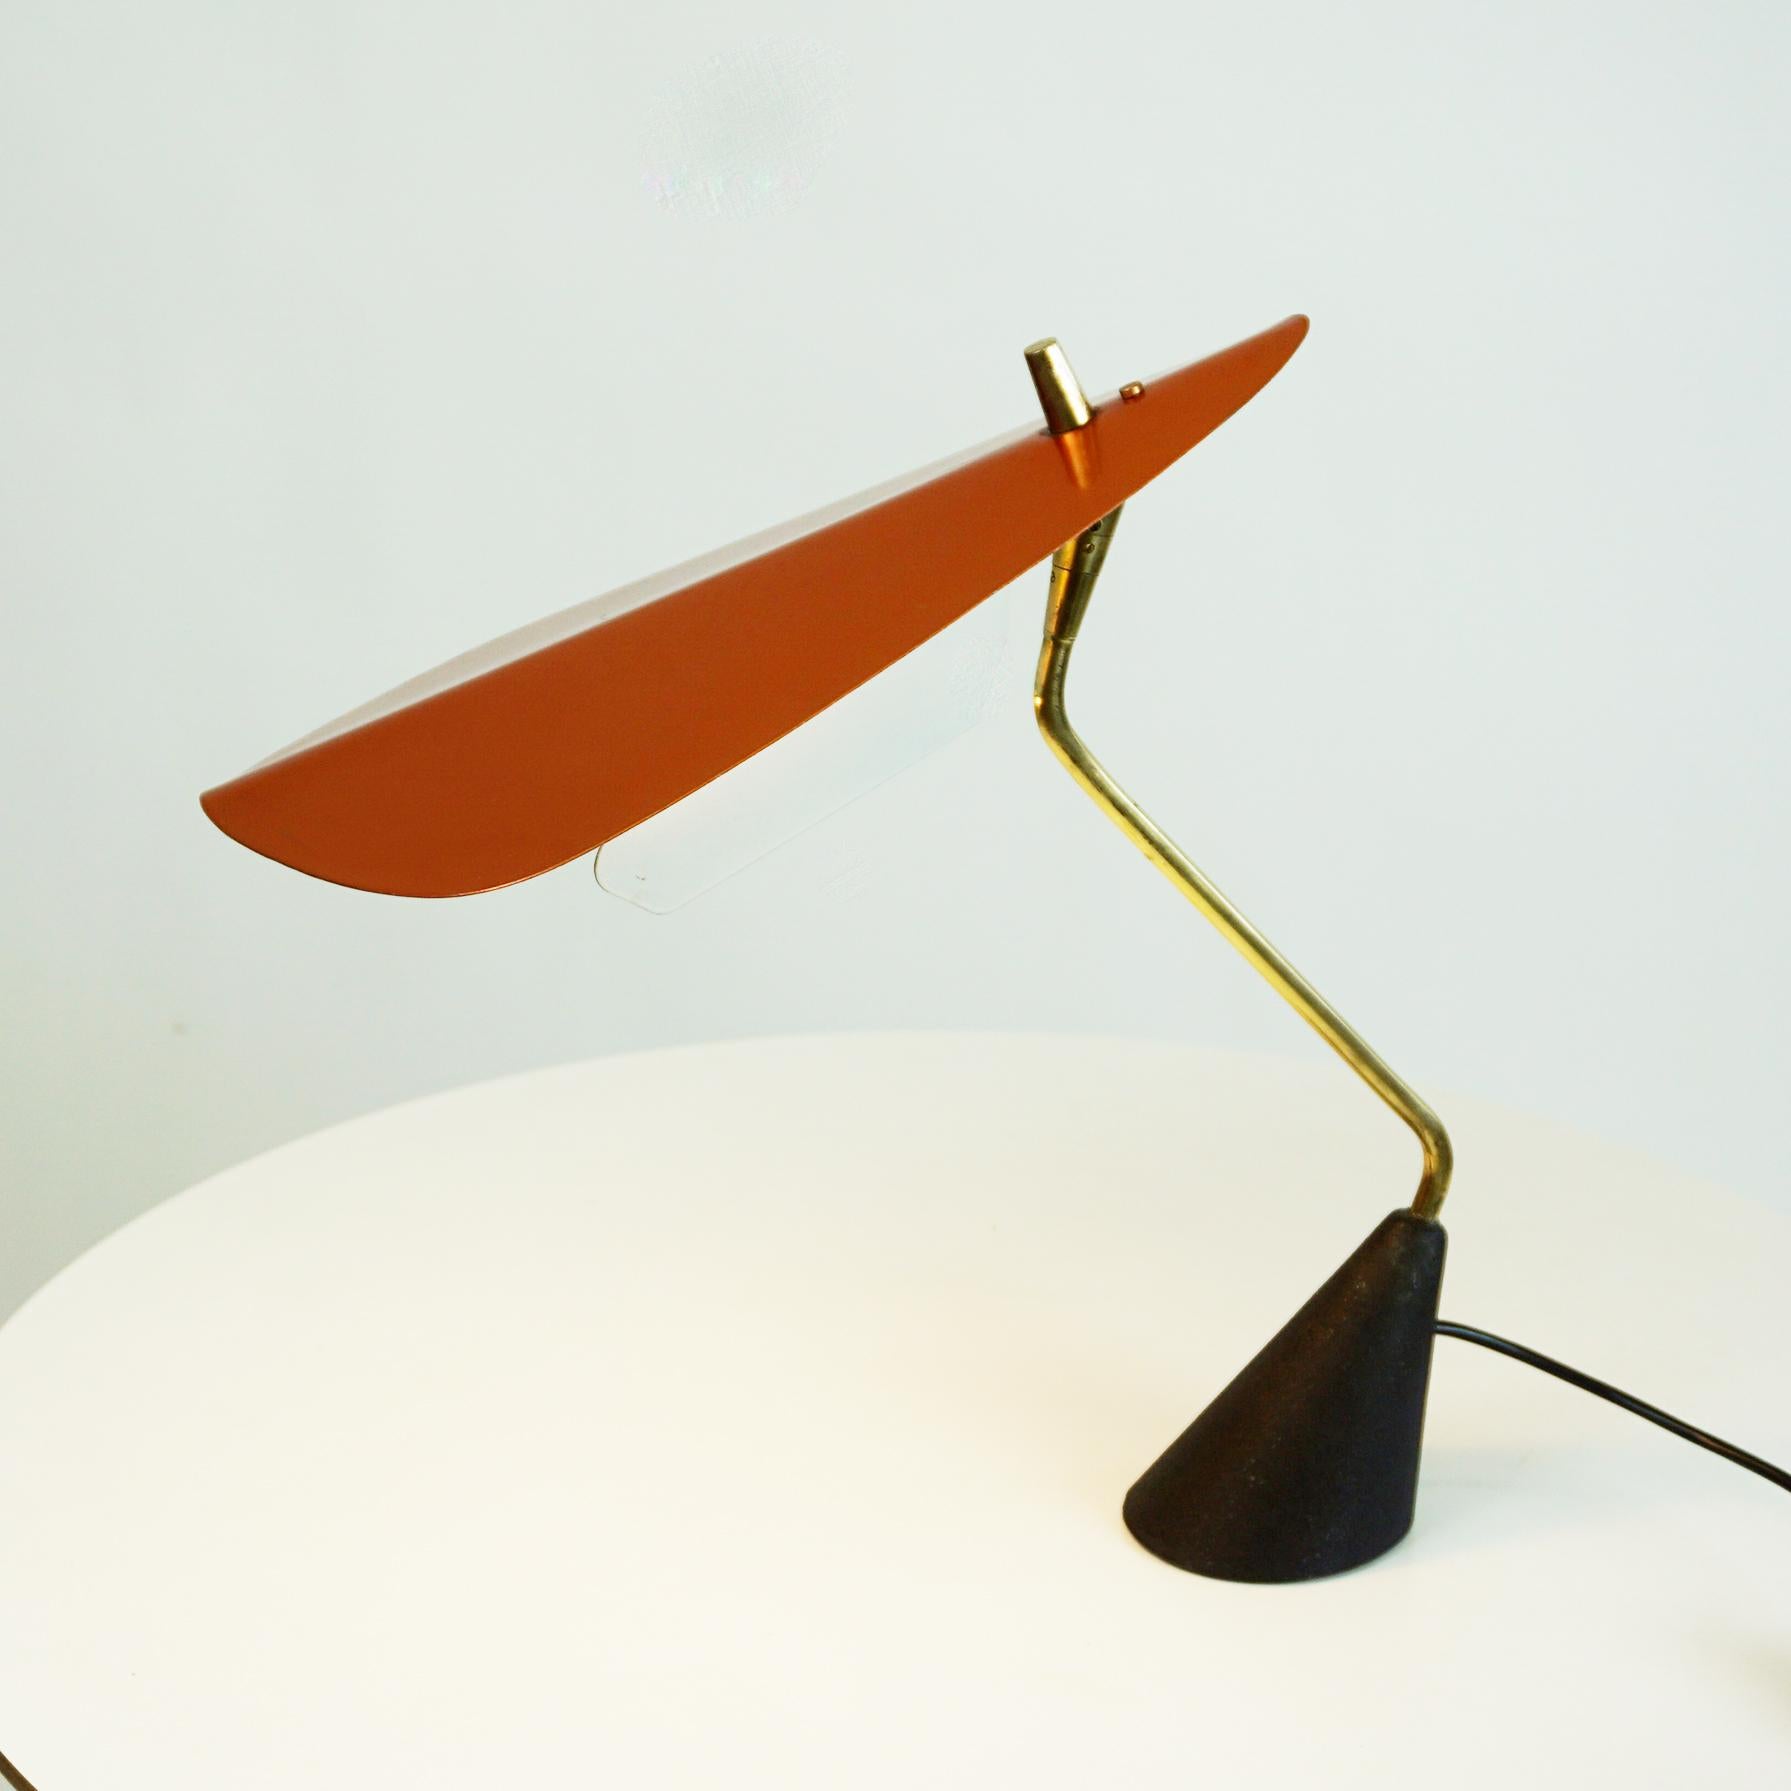 Rare and very charming Austrian Mid-Century Modern brass table or desk lamp designed by Karl Hagenauer ca 1955 and produced by Werkstätte Hagenauer Vienna.
It features a sculptural construction with cast iron foot, brass tube and anodised aluminium